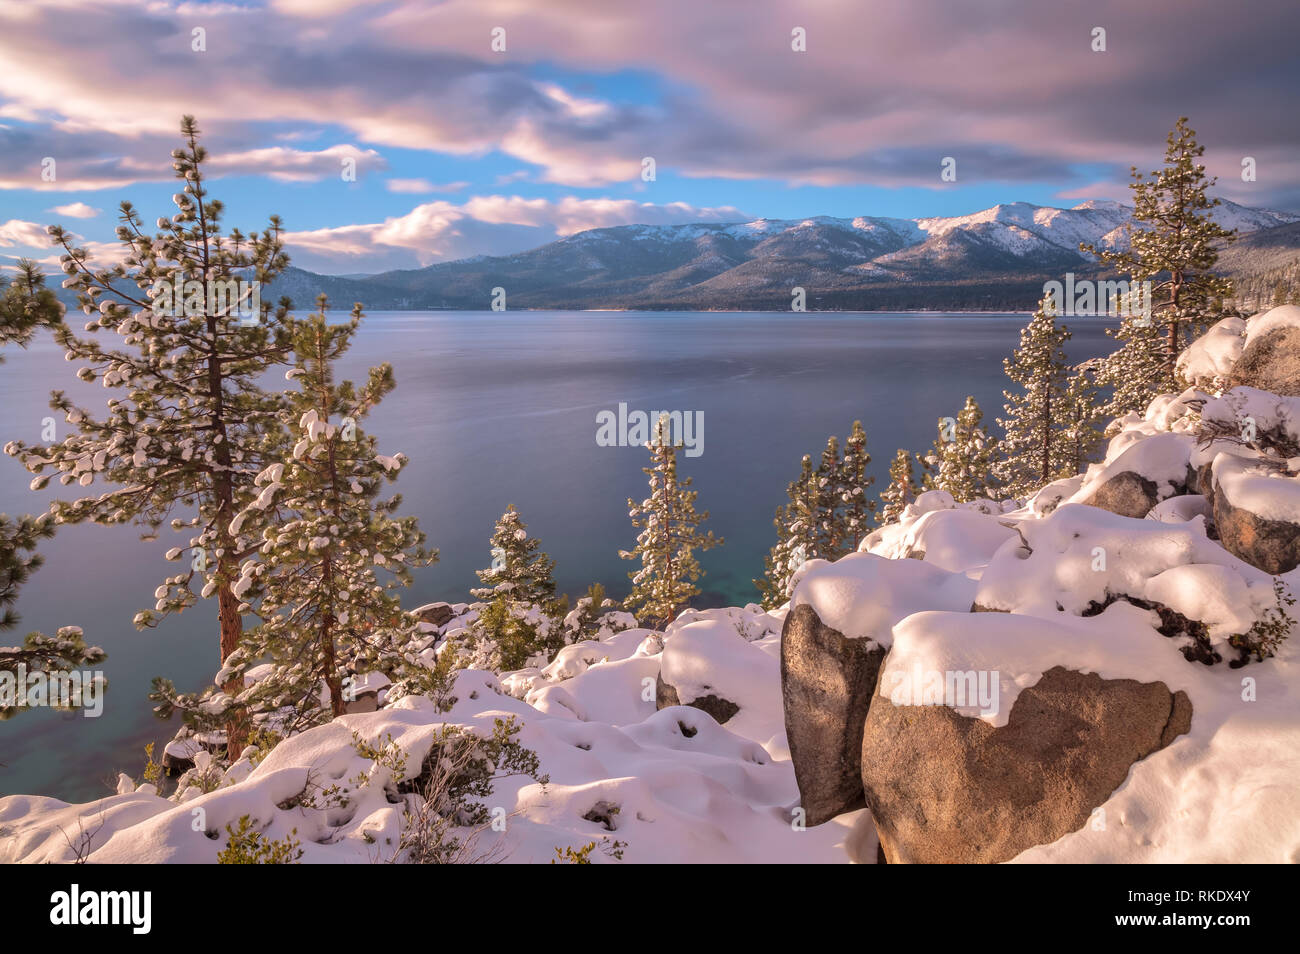 Lake Tahoe after a winter snow storm at sunset, Lake Tahoe State Park, Nevada, United States. Stock Photo